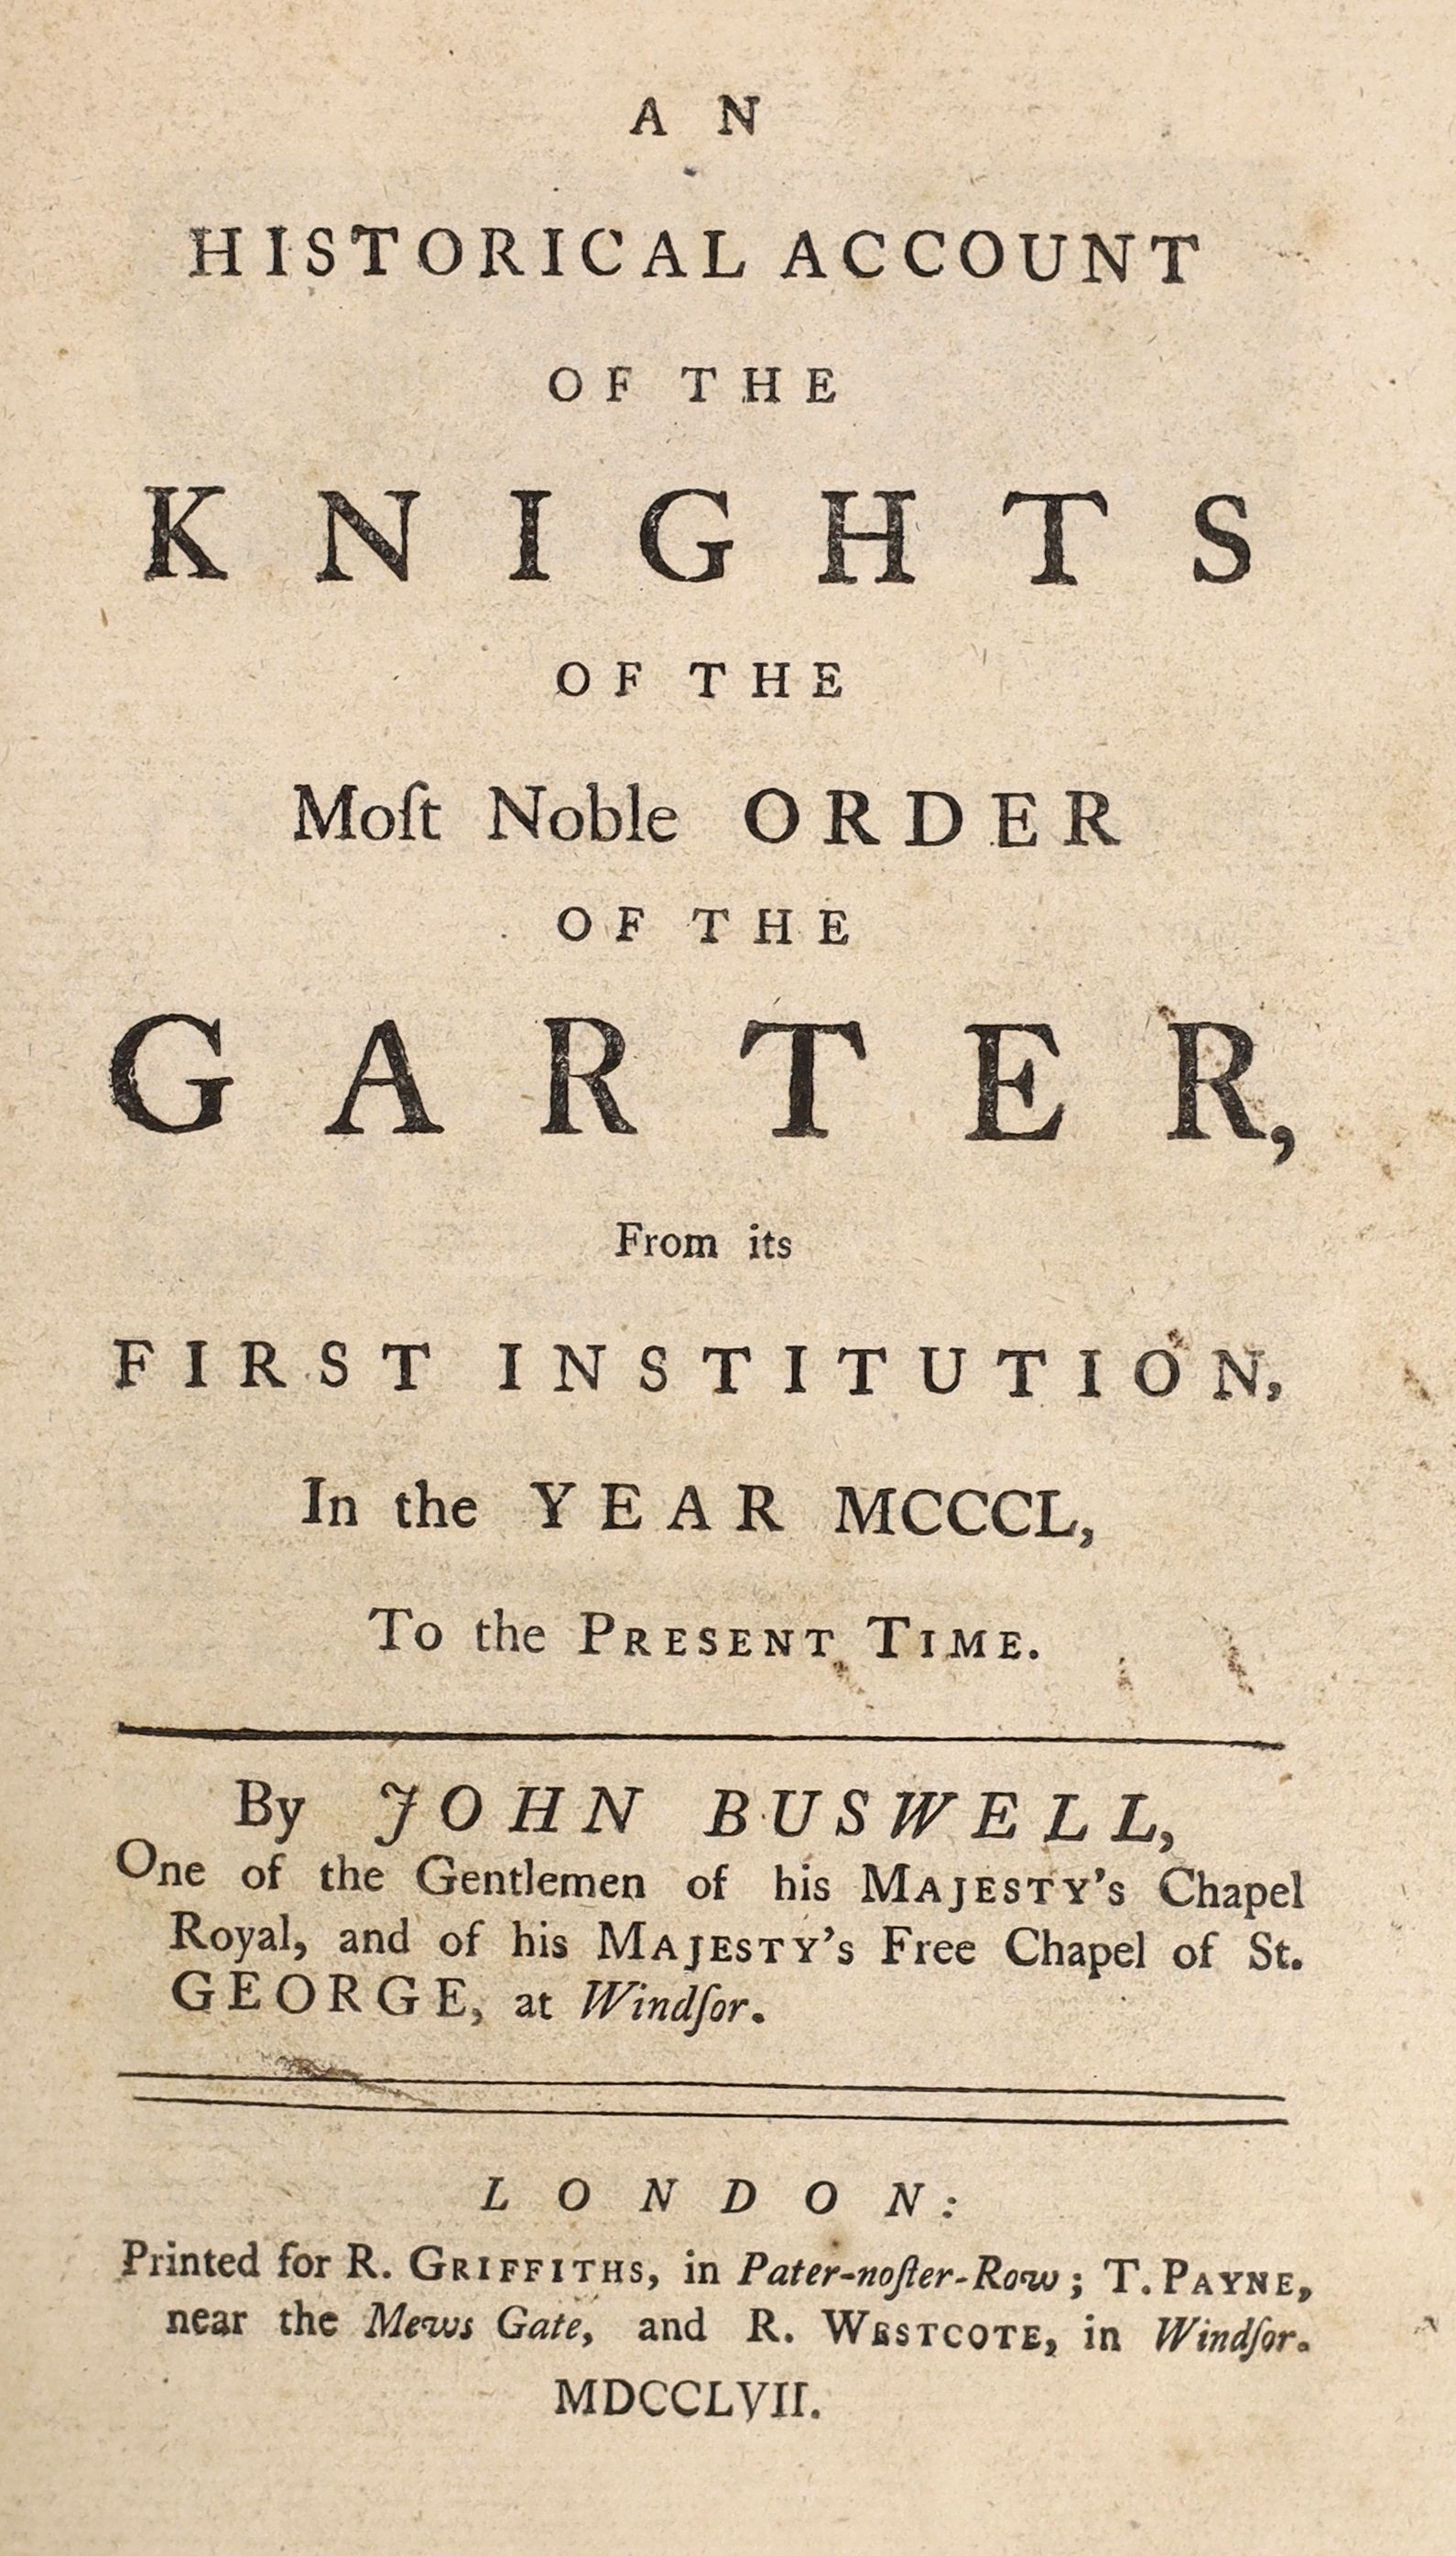 Buswell, John - An Historical Account of the Knights of The Most Noble Order of the Garter, 8vo, rebound half calf, marbled boards, leaves interleaved, R. Griffiths et al, London, 1757